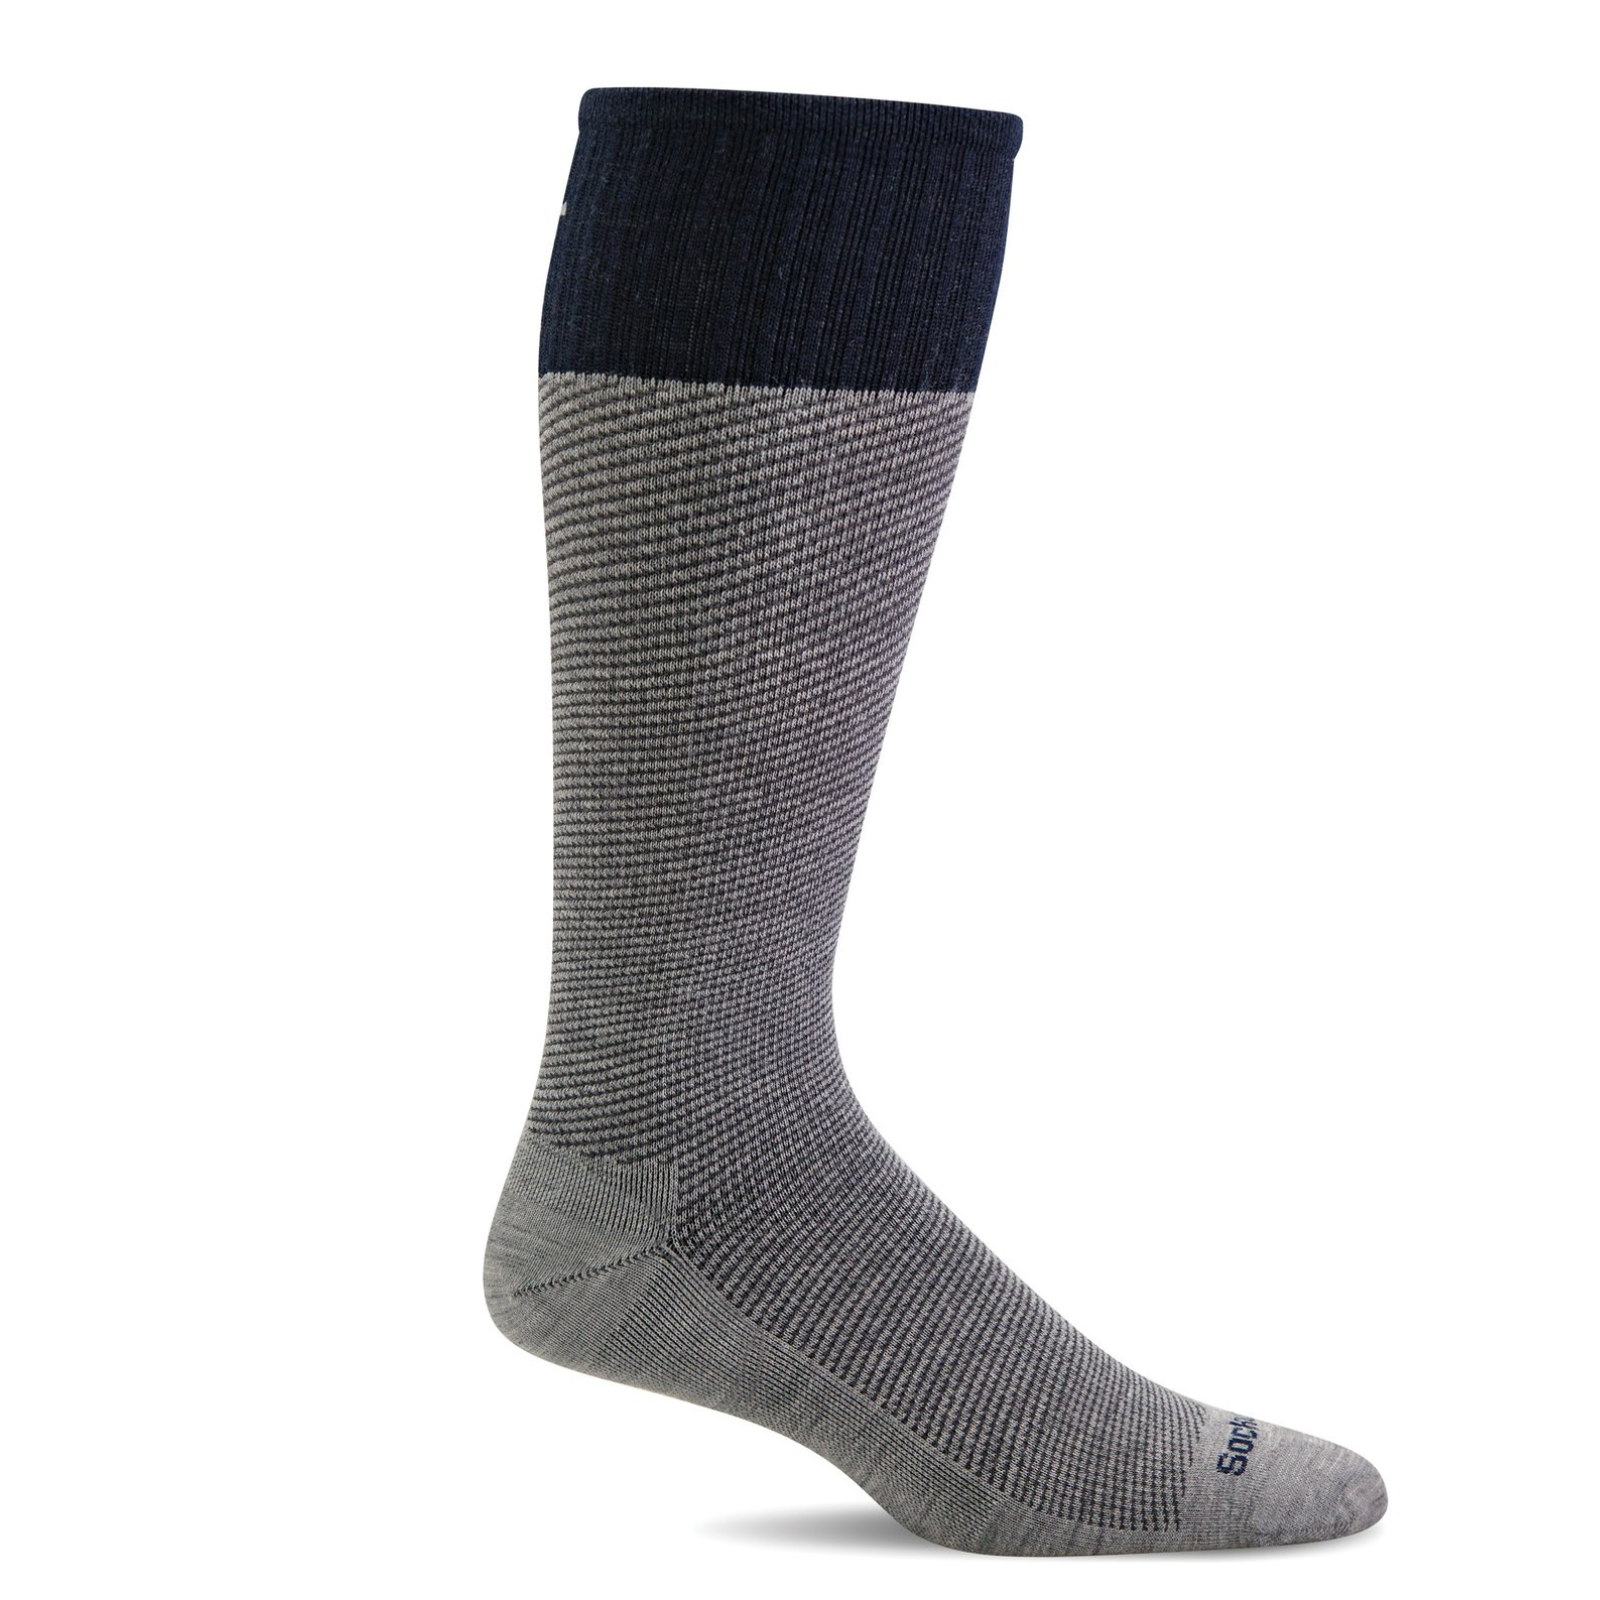 Sockwell Bart moderate graduated compression (15-20mmHg) men's knee sock sock featuring gray sock with black cuff